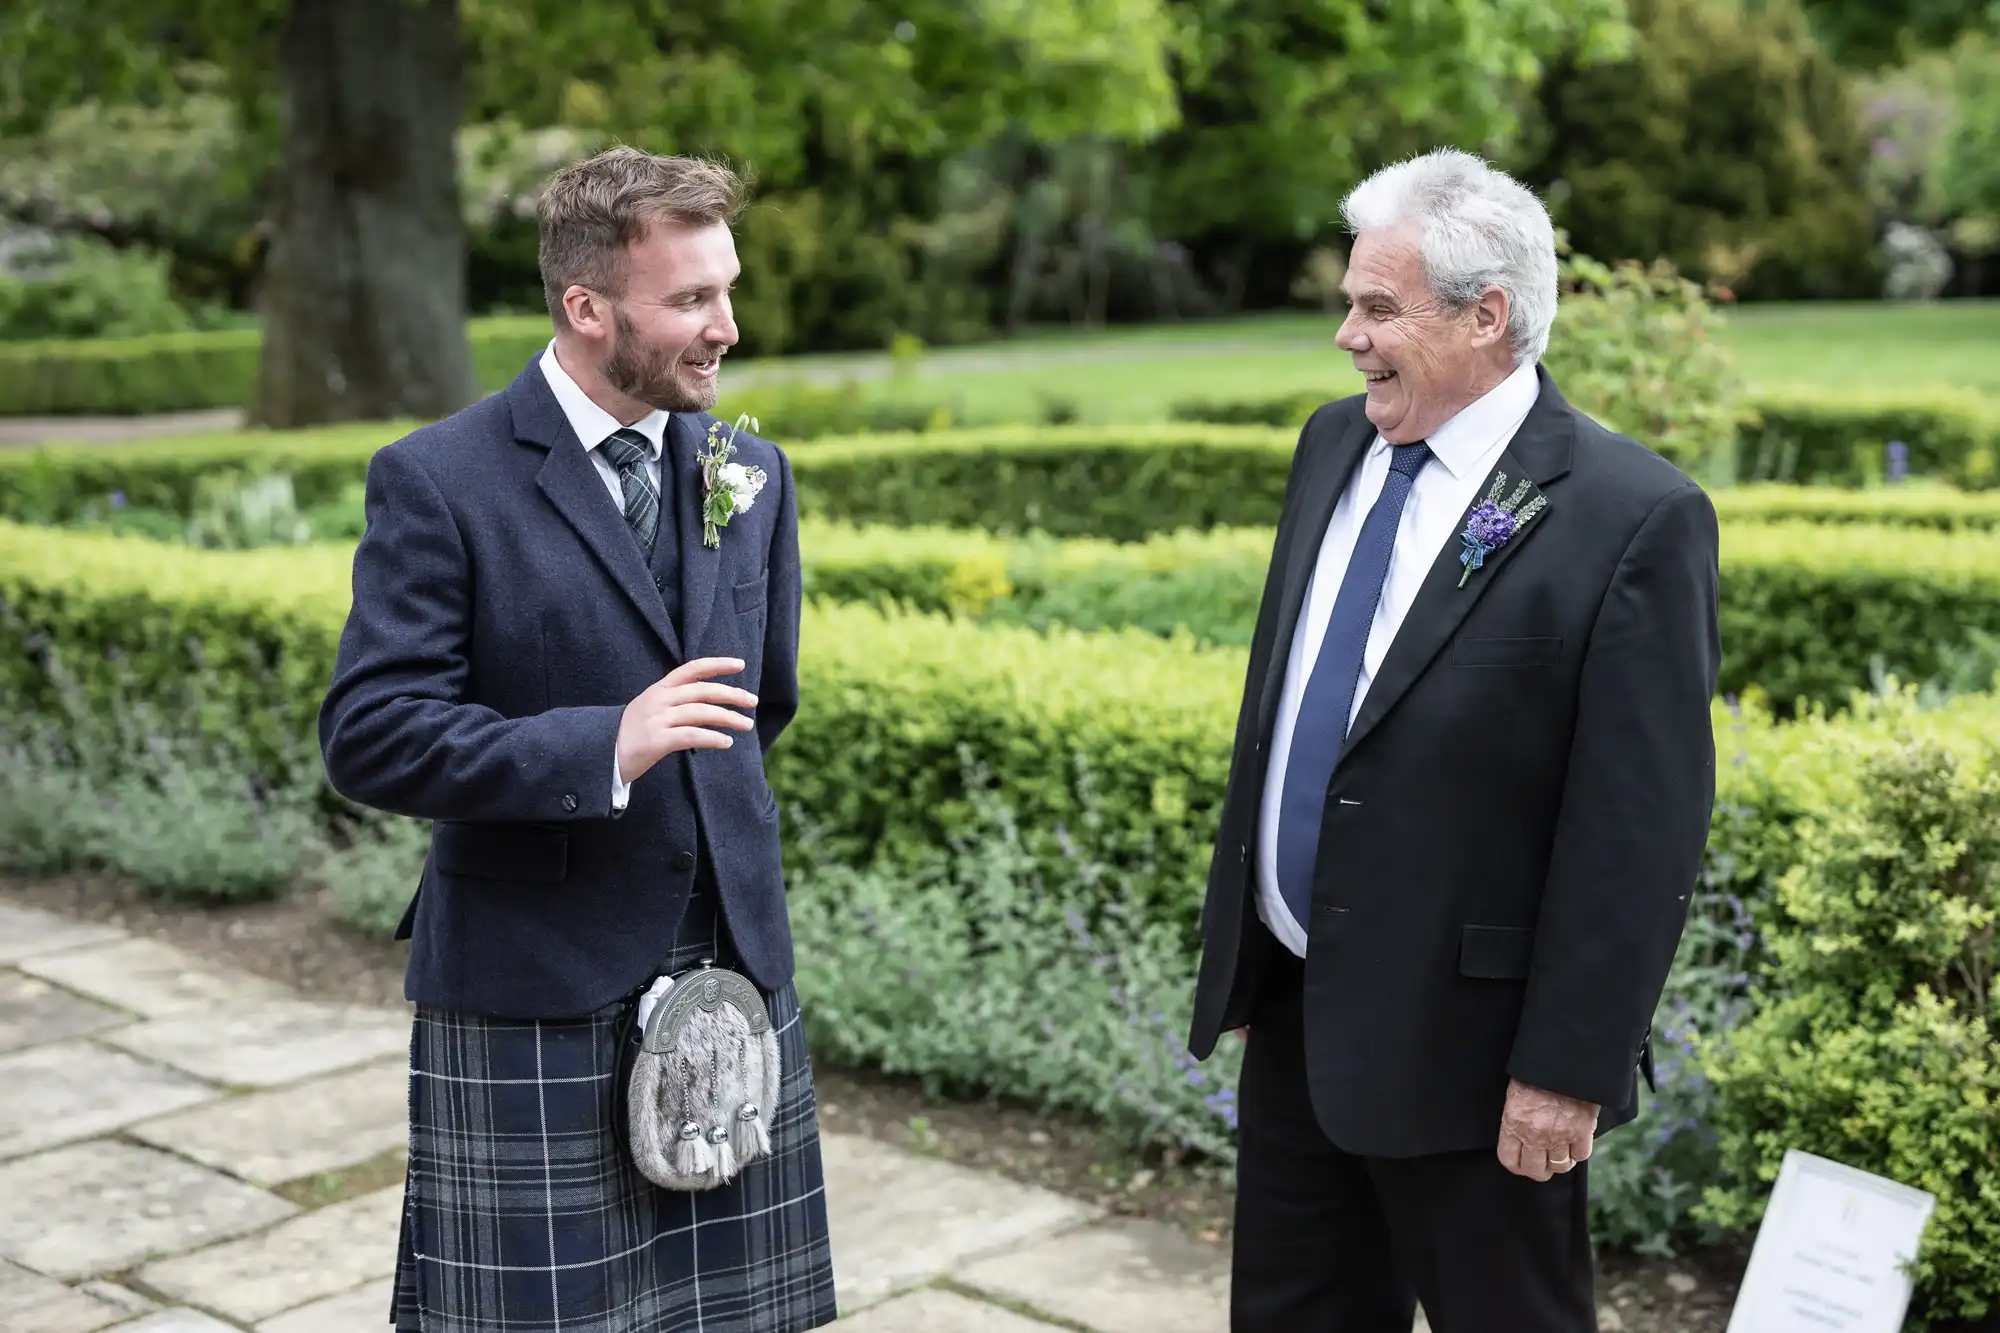 Two men in formal attire, one in a kilt, smiling and talking at an outdoor event with greenery in the background.